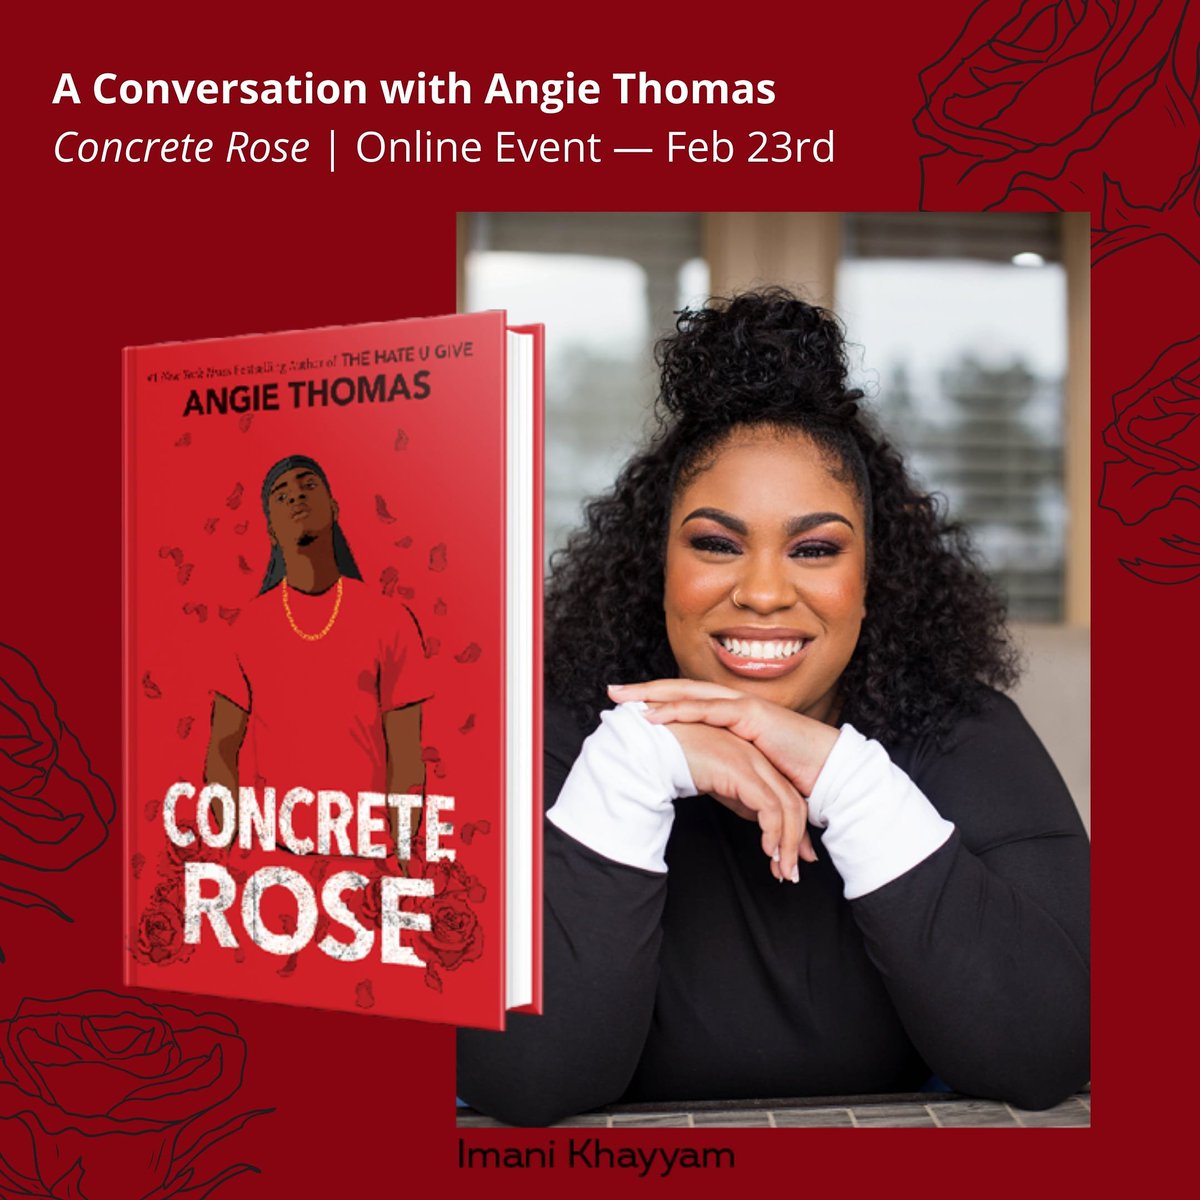 Grab a spot for next week's free online event with Angie Thomas, the acclaimed author of CONCRETE ROSE, a searing and poignant exploration of Black boyhood and manhood (and prequel to THE HATE U GIVE). 
Register at https://t.co/lvxjwy0xvD

#IndieBookstore #MonticelloBookstore https://t.co/RMGDECC4A7